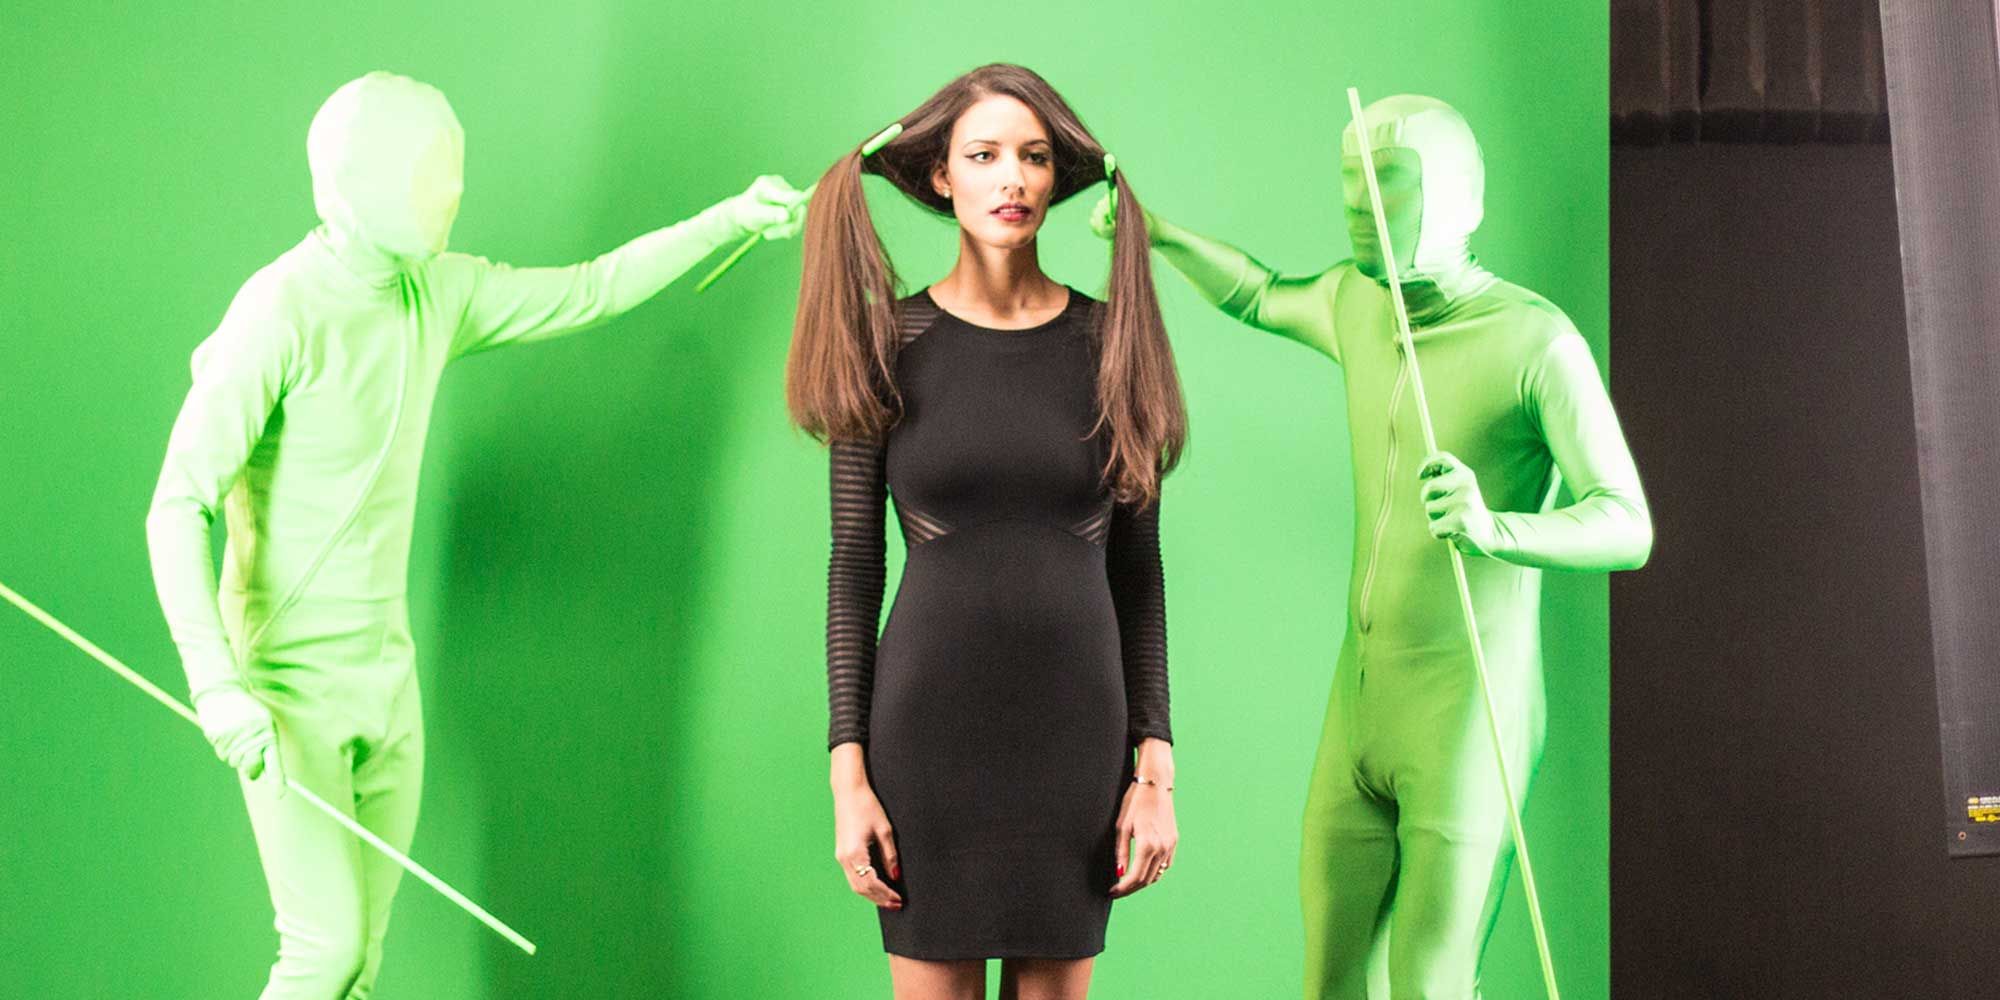 So THIS Is How They Make Hair Look So Freaking Perfect in Those Commercials